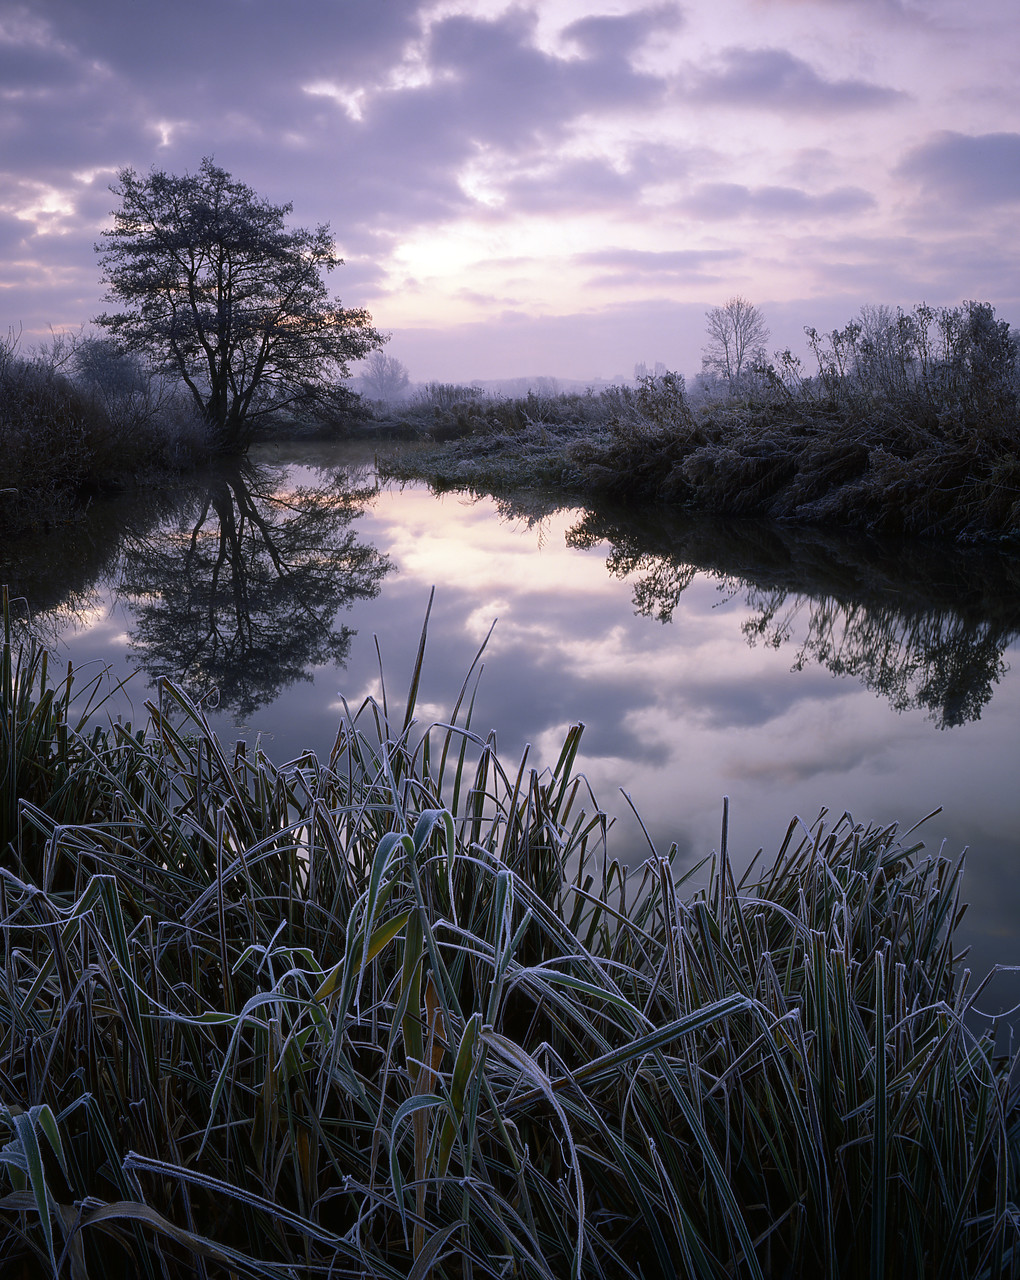 #913858-3 - River Yare Reflections in Frost, Norwich, Norfolk, England